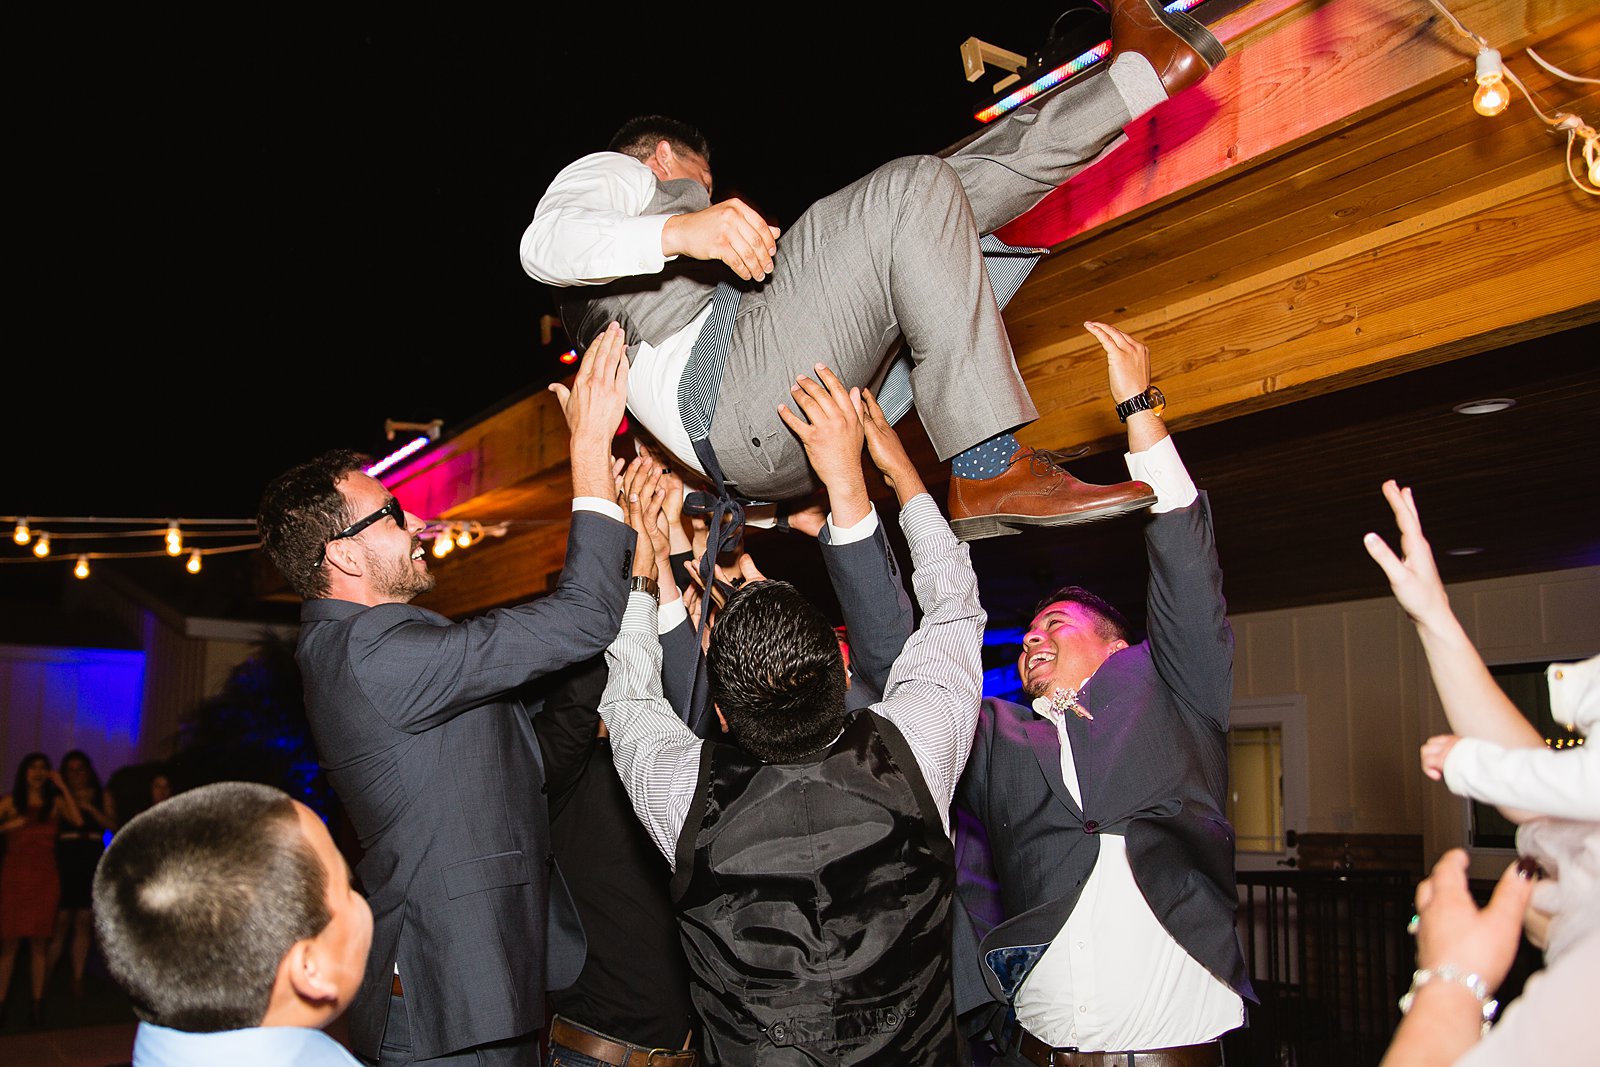 Guests tossing groom at the wedding reception during a cultural tradition at Schnepf Farms wedding by PMA Photography.